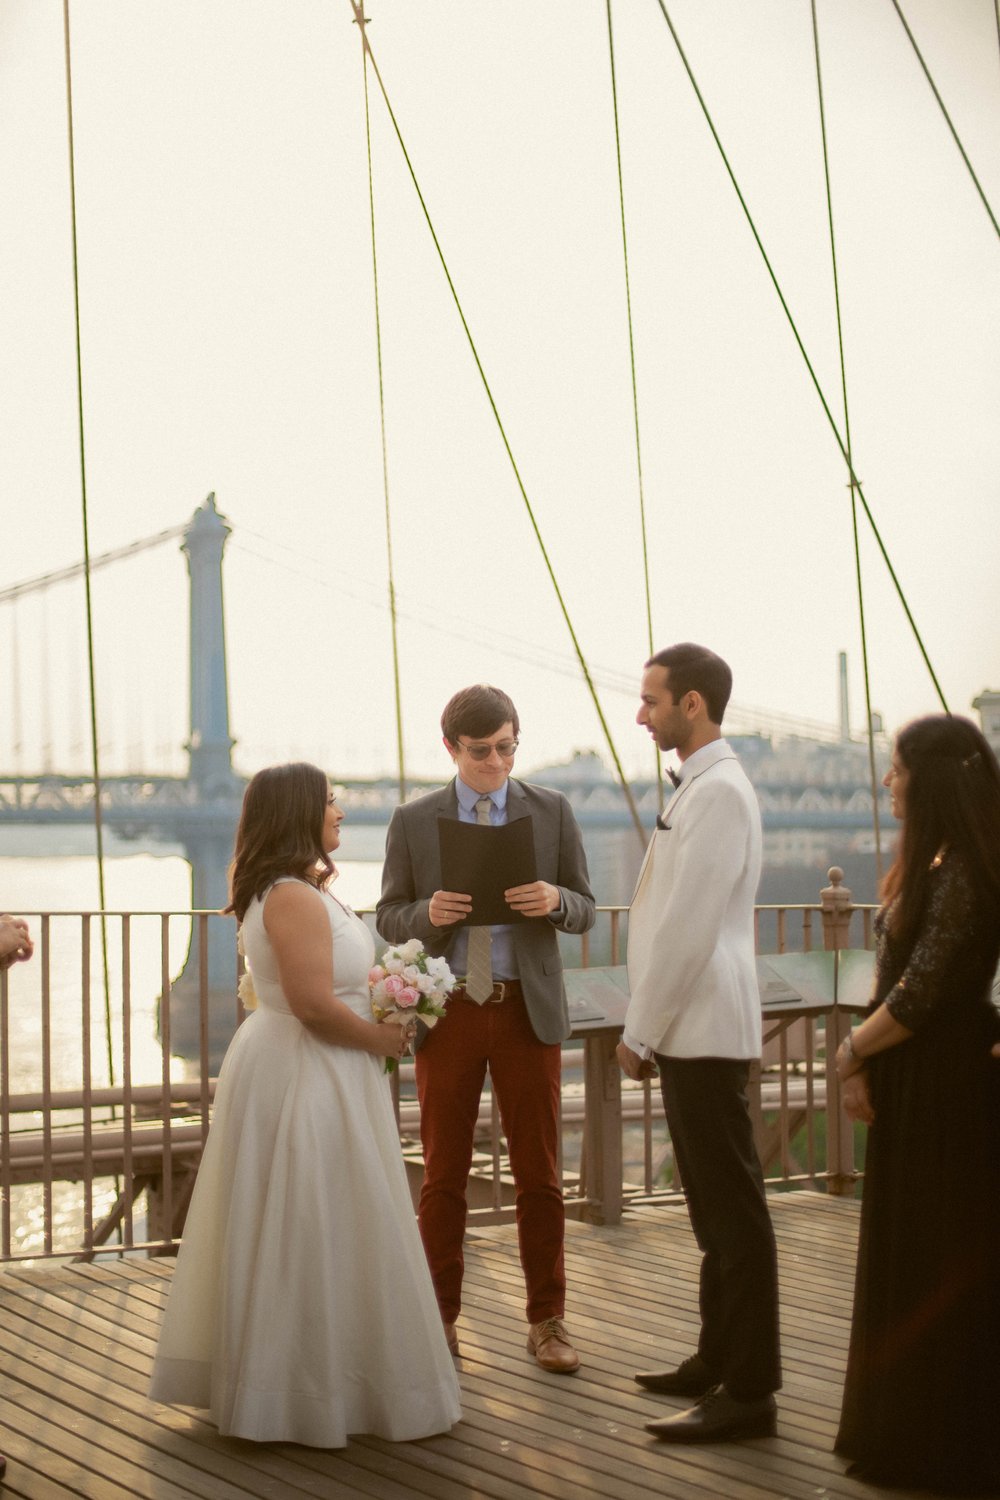 Dream NYC elopement made real: our package includes a photographer &amp; officiant guiding you through picturesque locations.